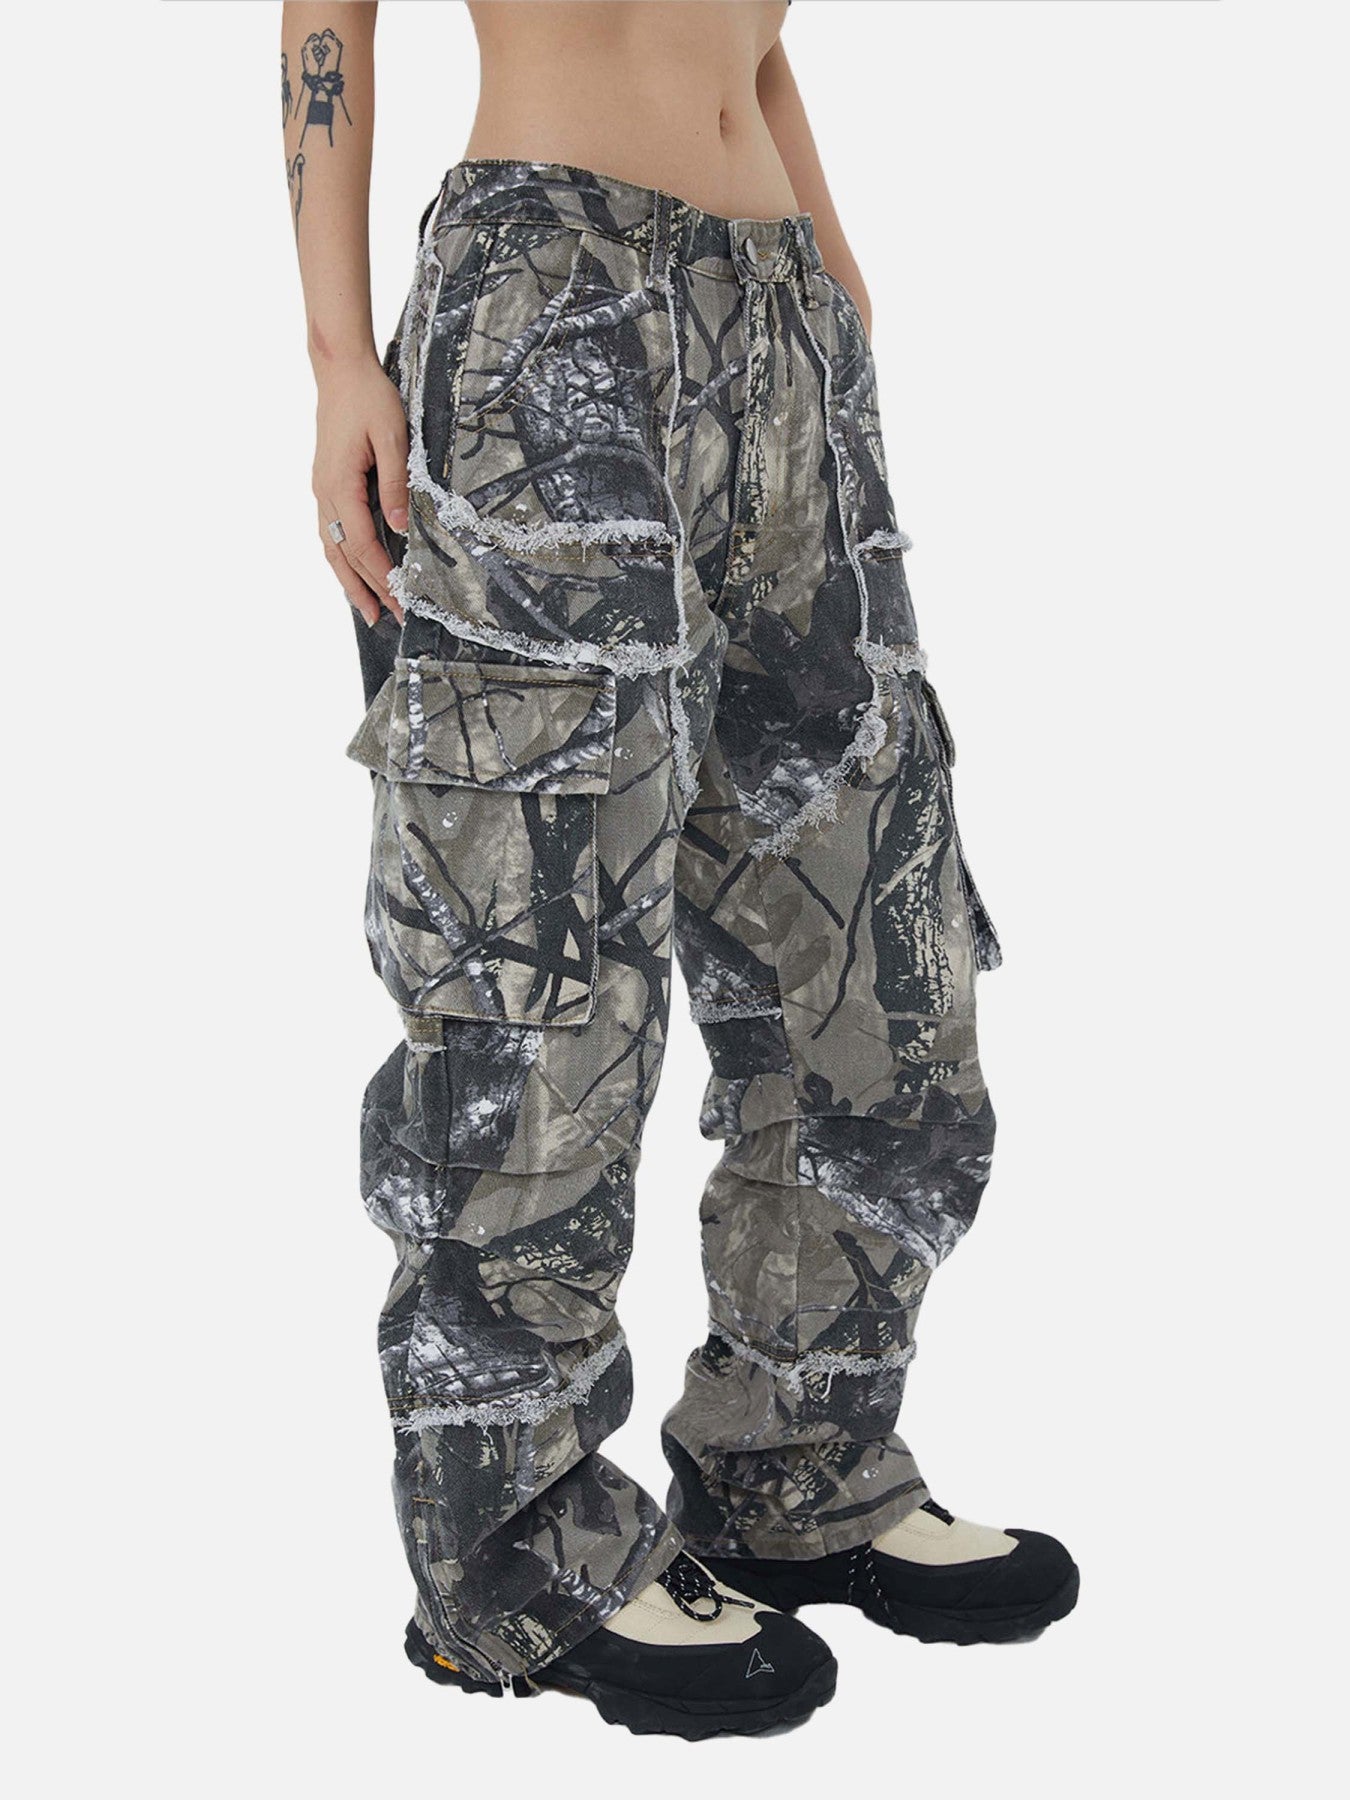 Thesupermade Jungle Camouflage Leaf Loose Fit Straight Leg Pants- 1870